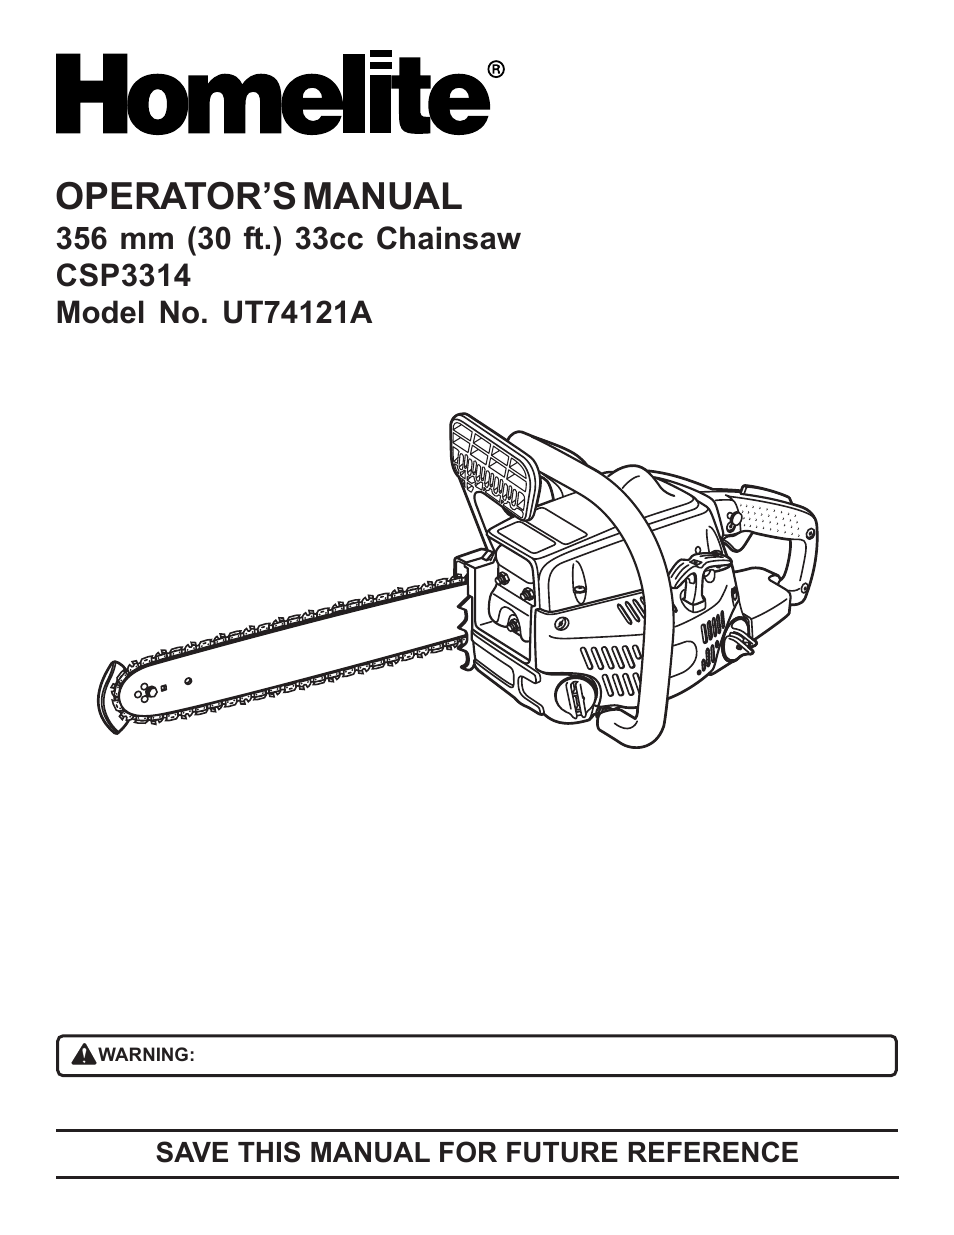 Homelite UT74121A User Manual | 40 pages